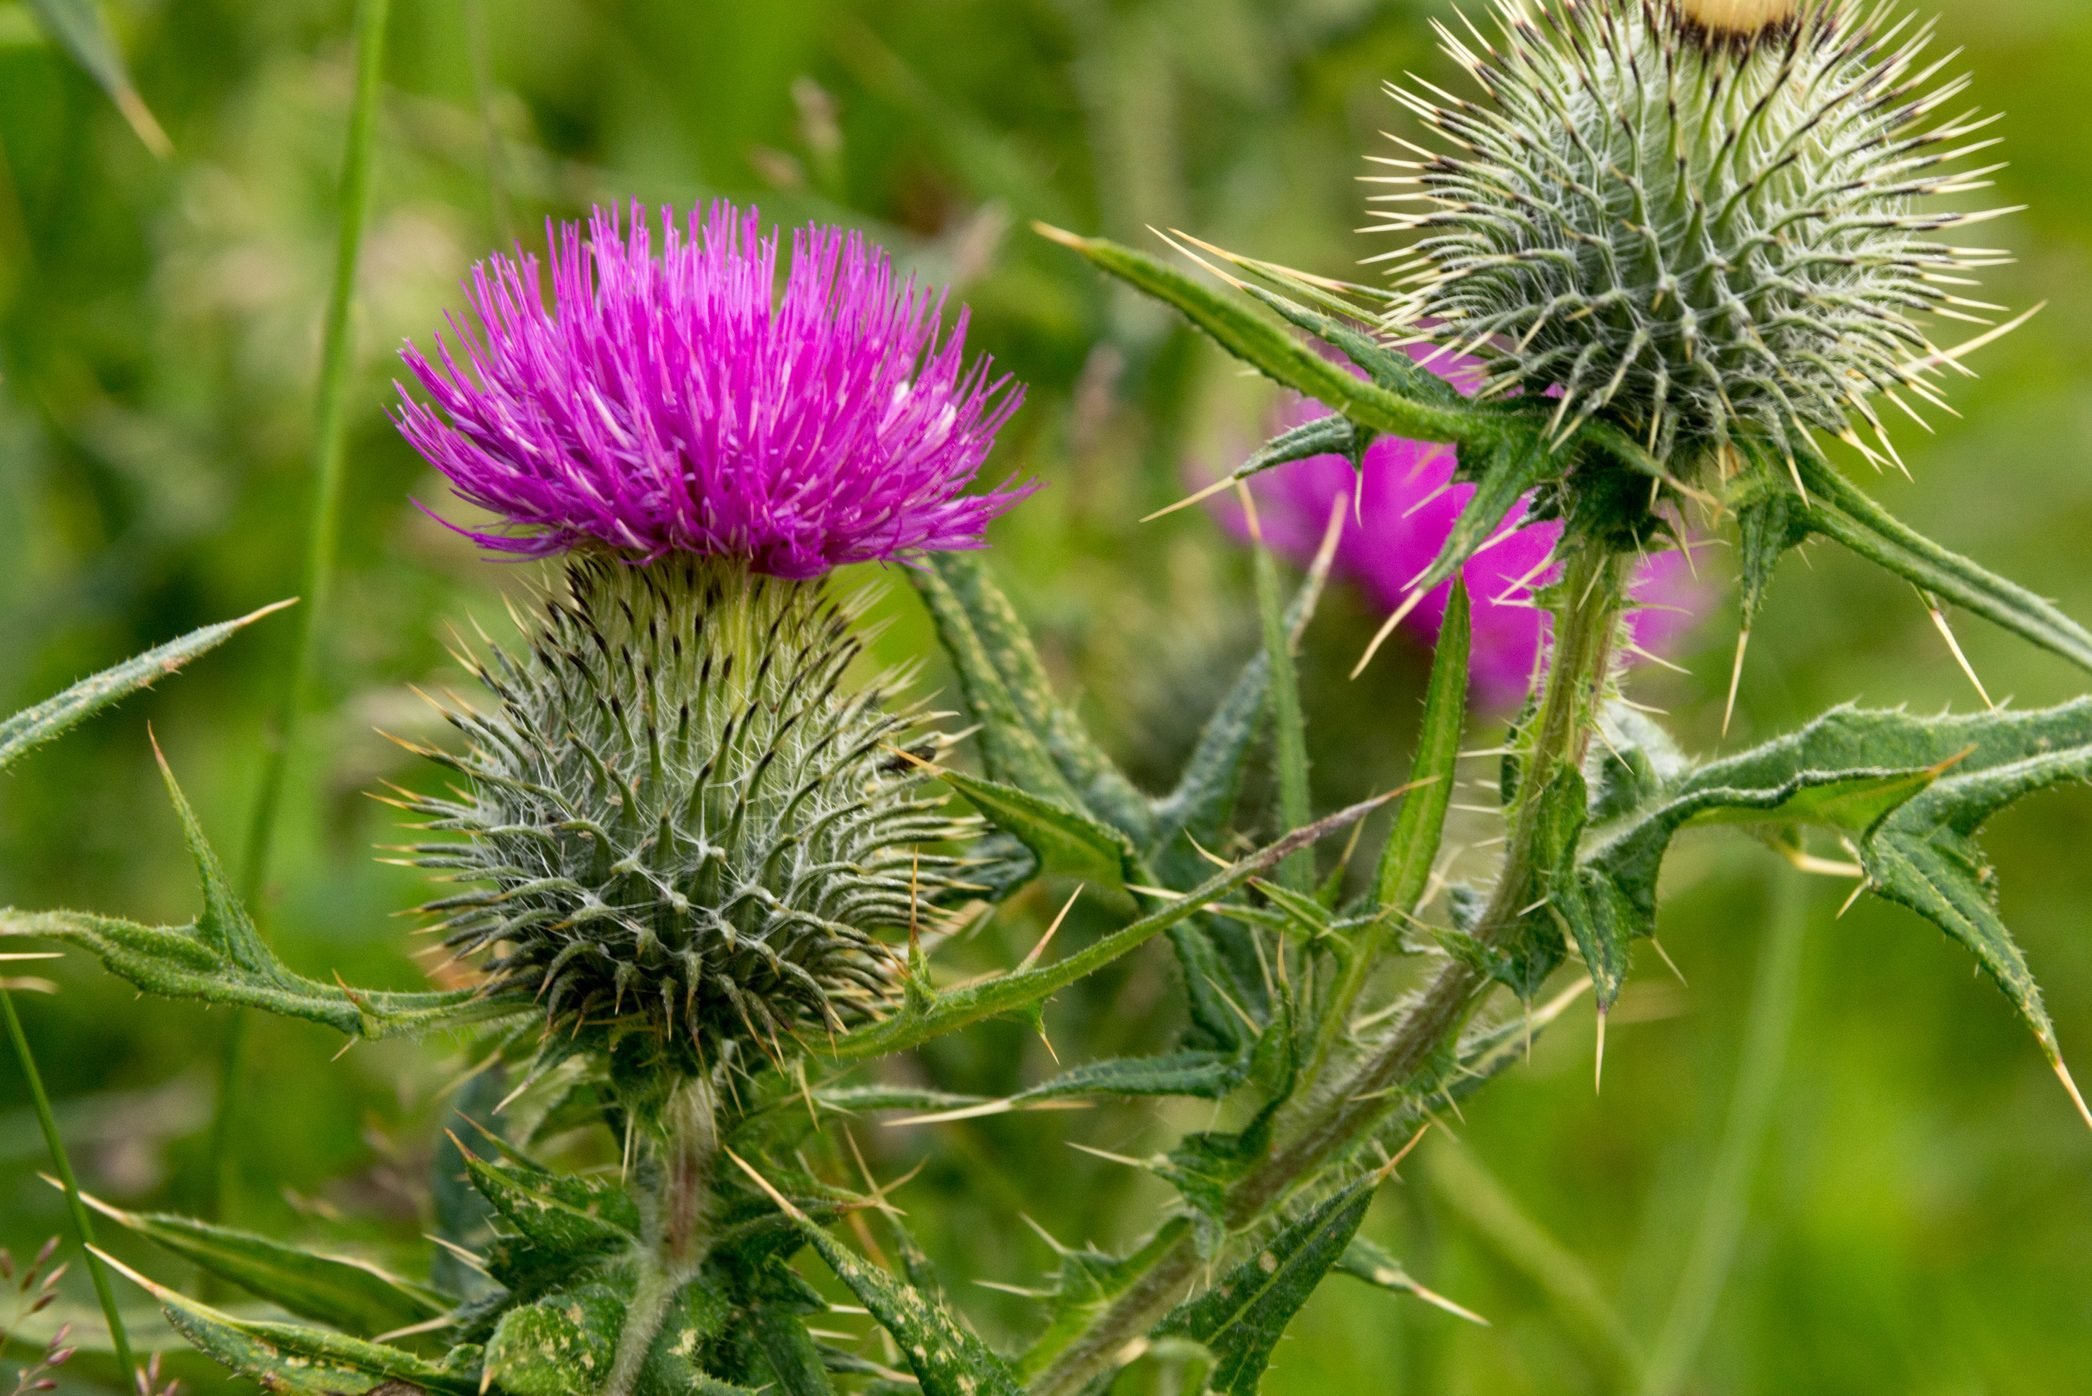 What Is Canada Thistle and How Do I Get Rid of It?